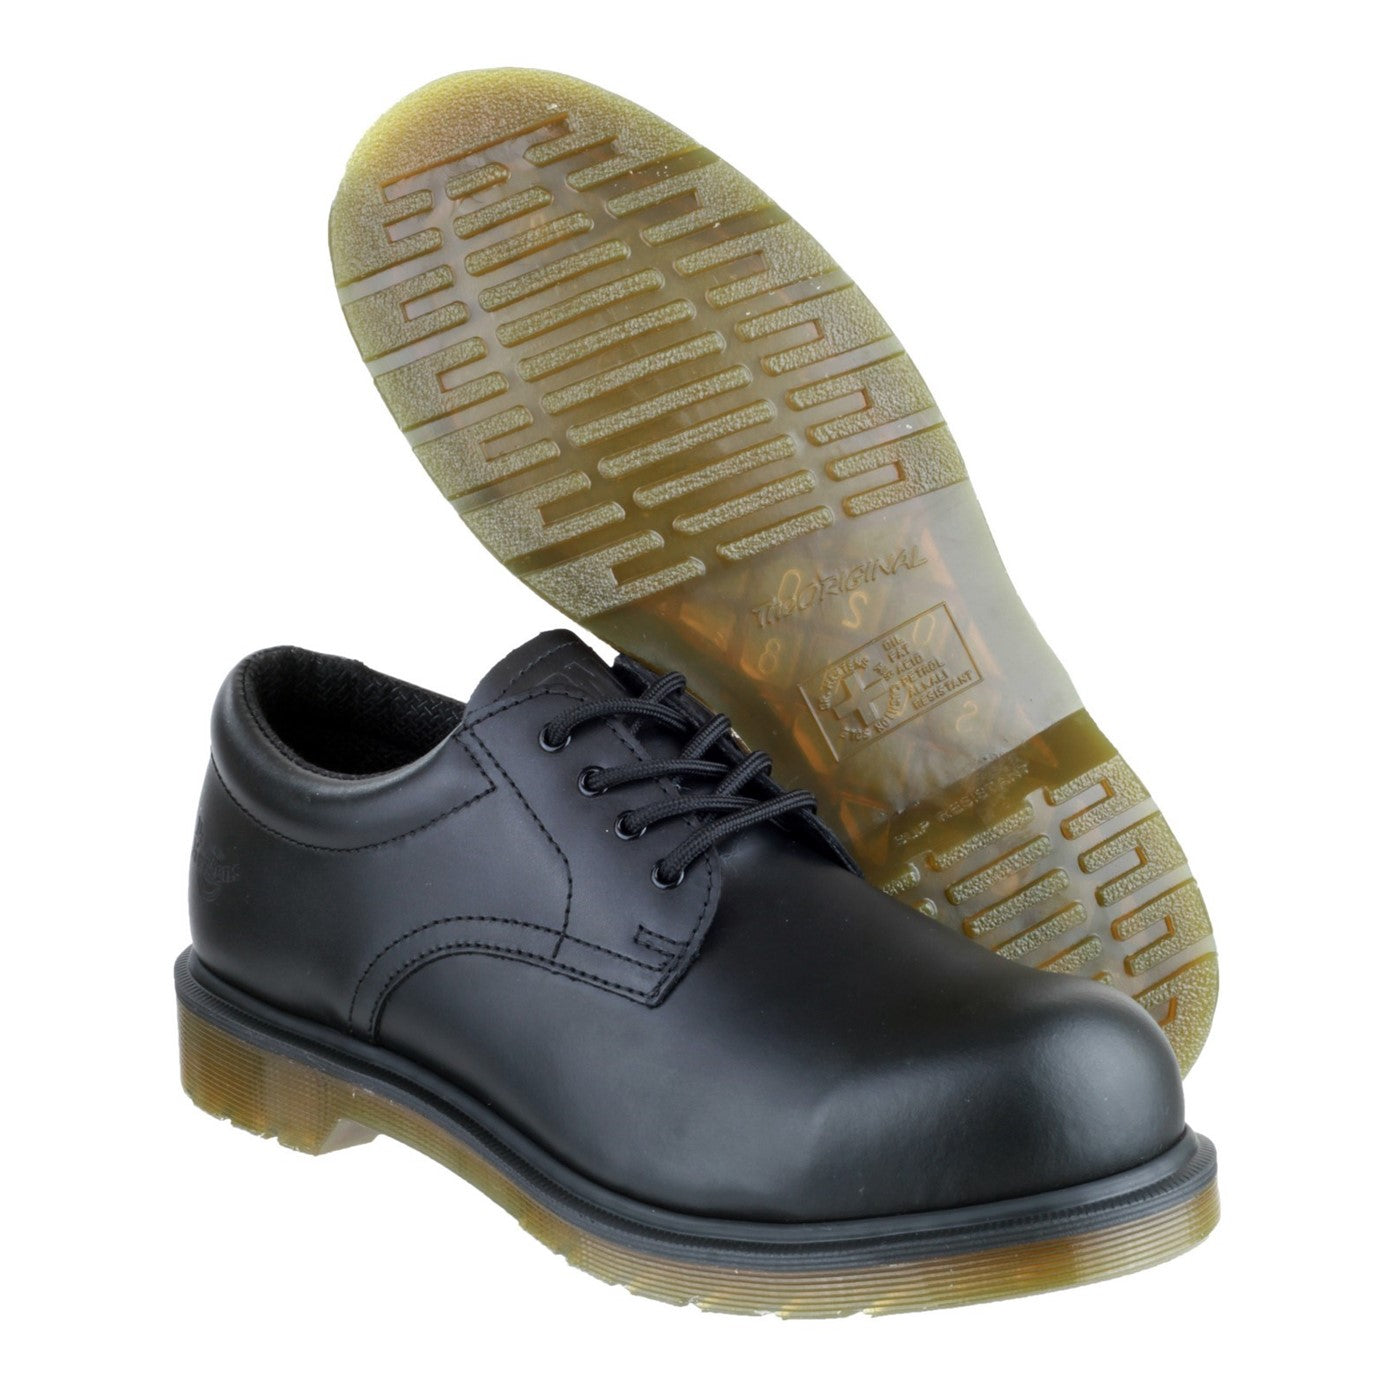 Unisex Dr Martens FS57 Icon Lace up Safety Shoe